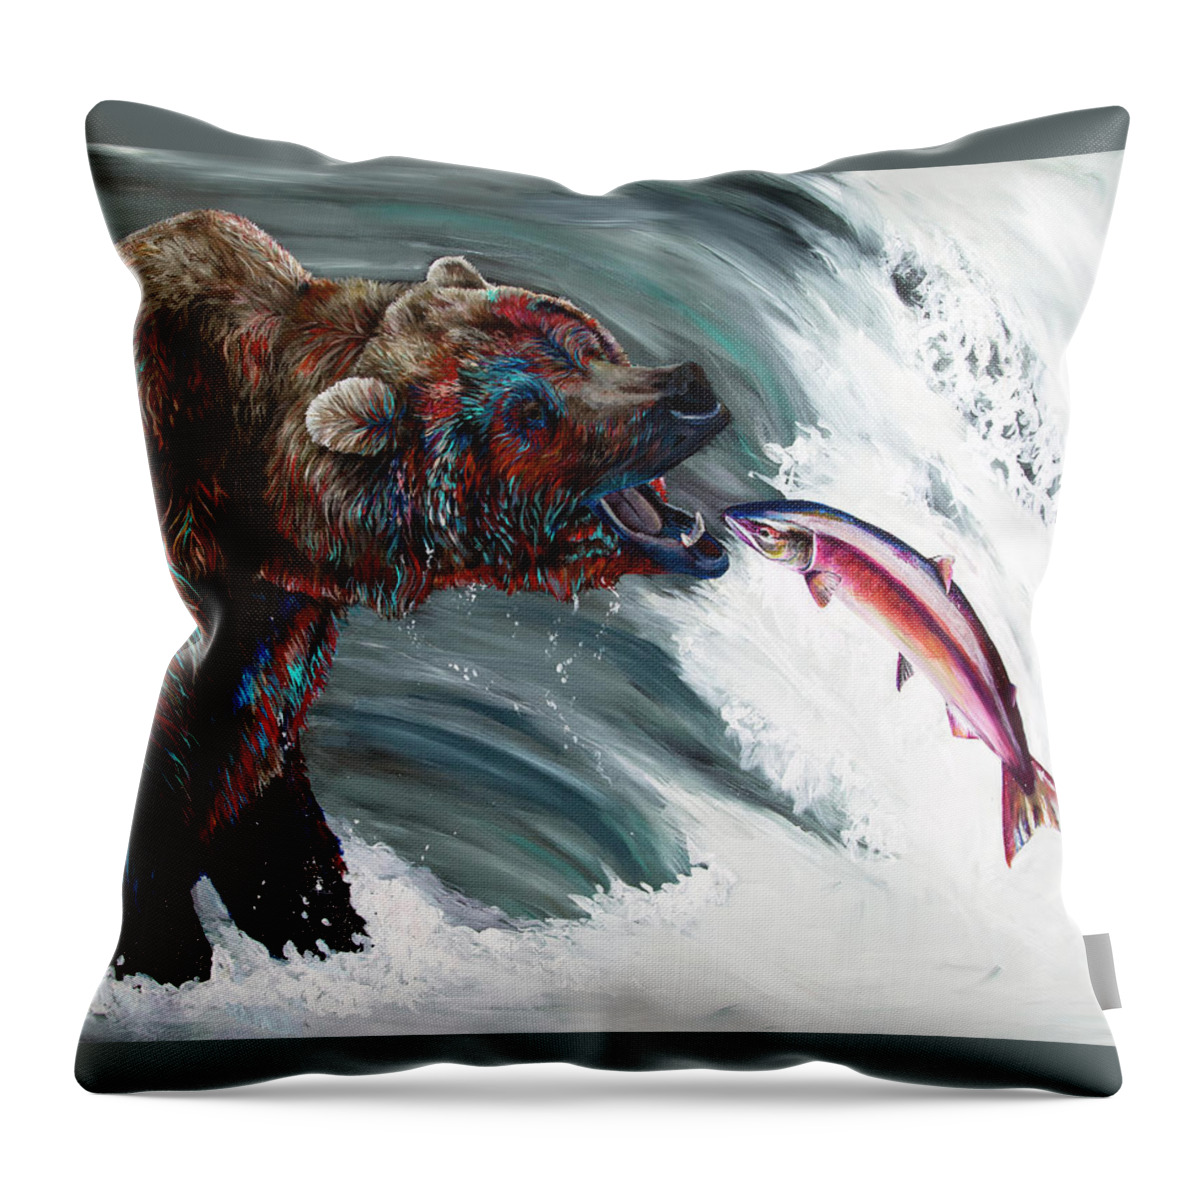 Grizzly Bear Throw Pillow featuring the painting Off The Hook by Averi Iris